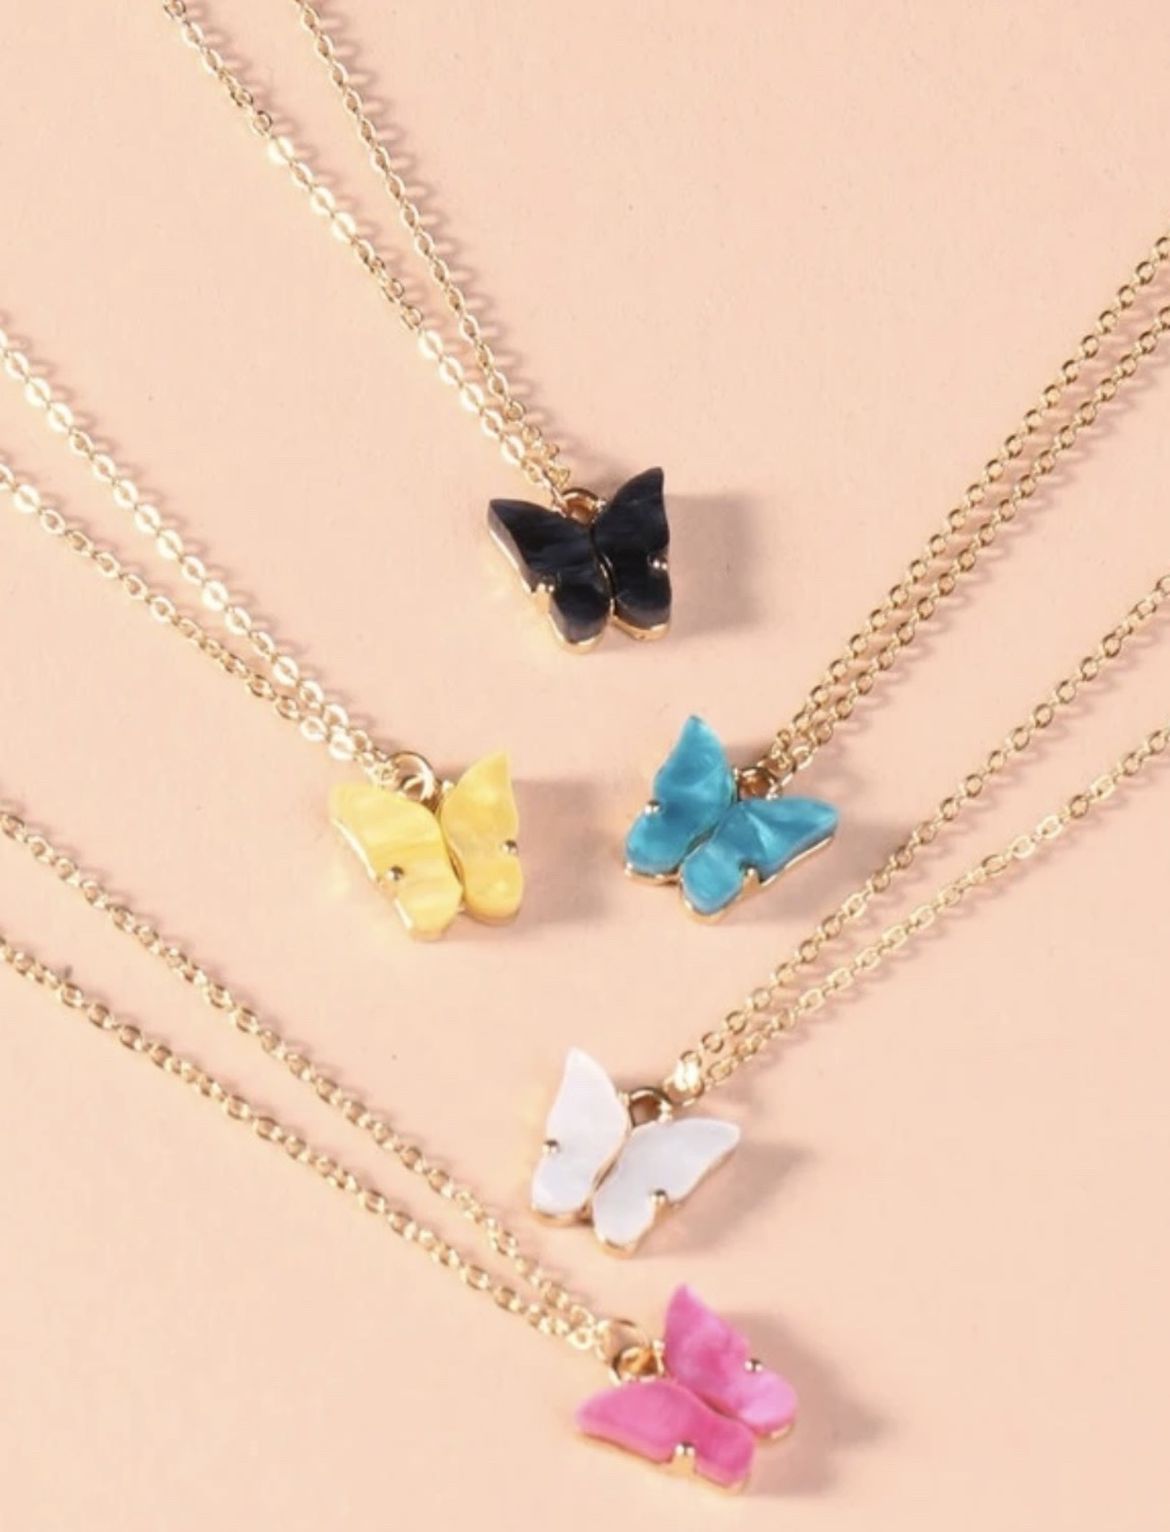 5 New Butterfly Necklace